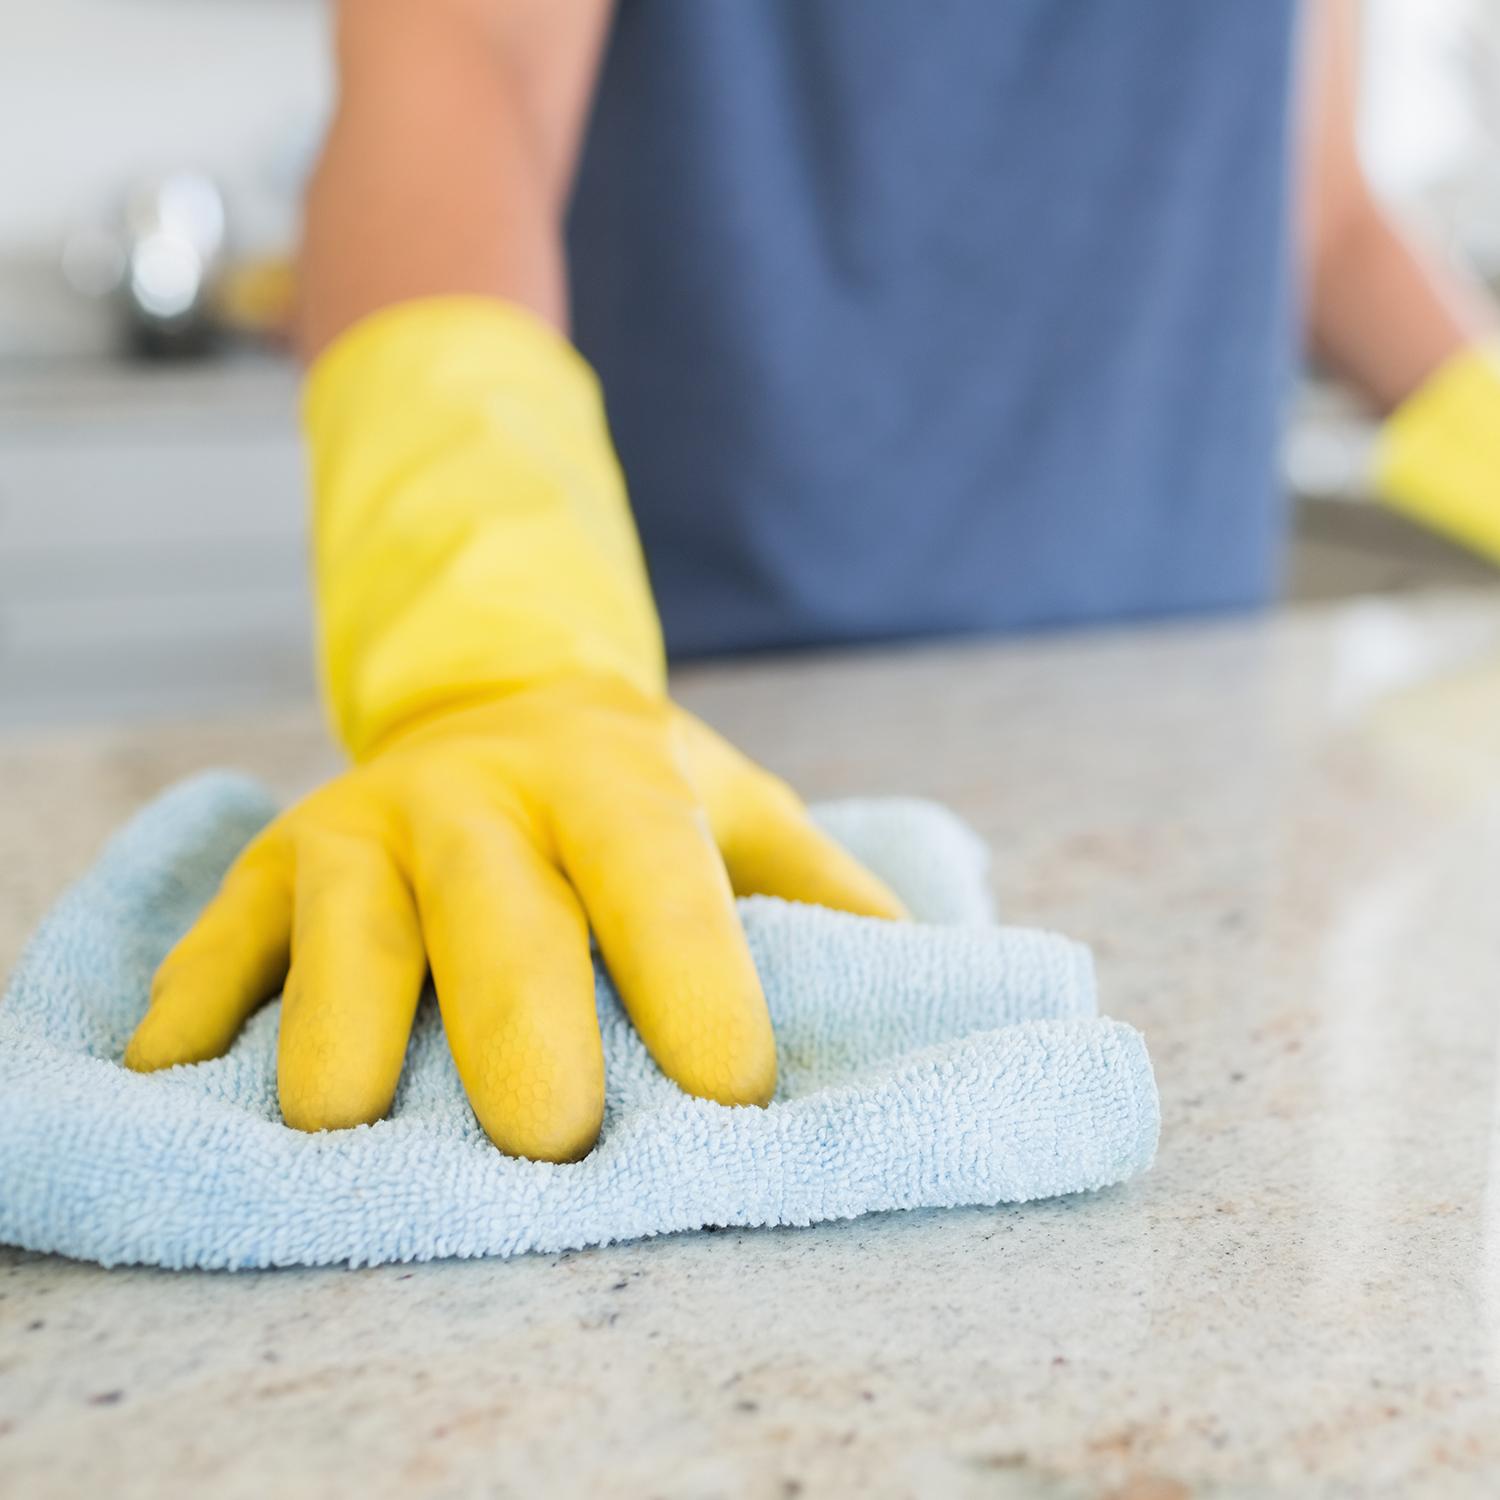 Cleaning Tips from Puffy by the Types of Kitchen Countertops 